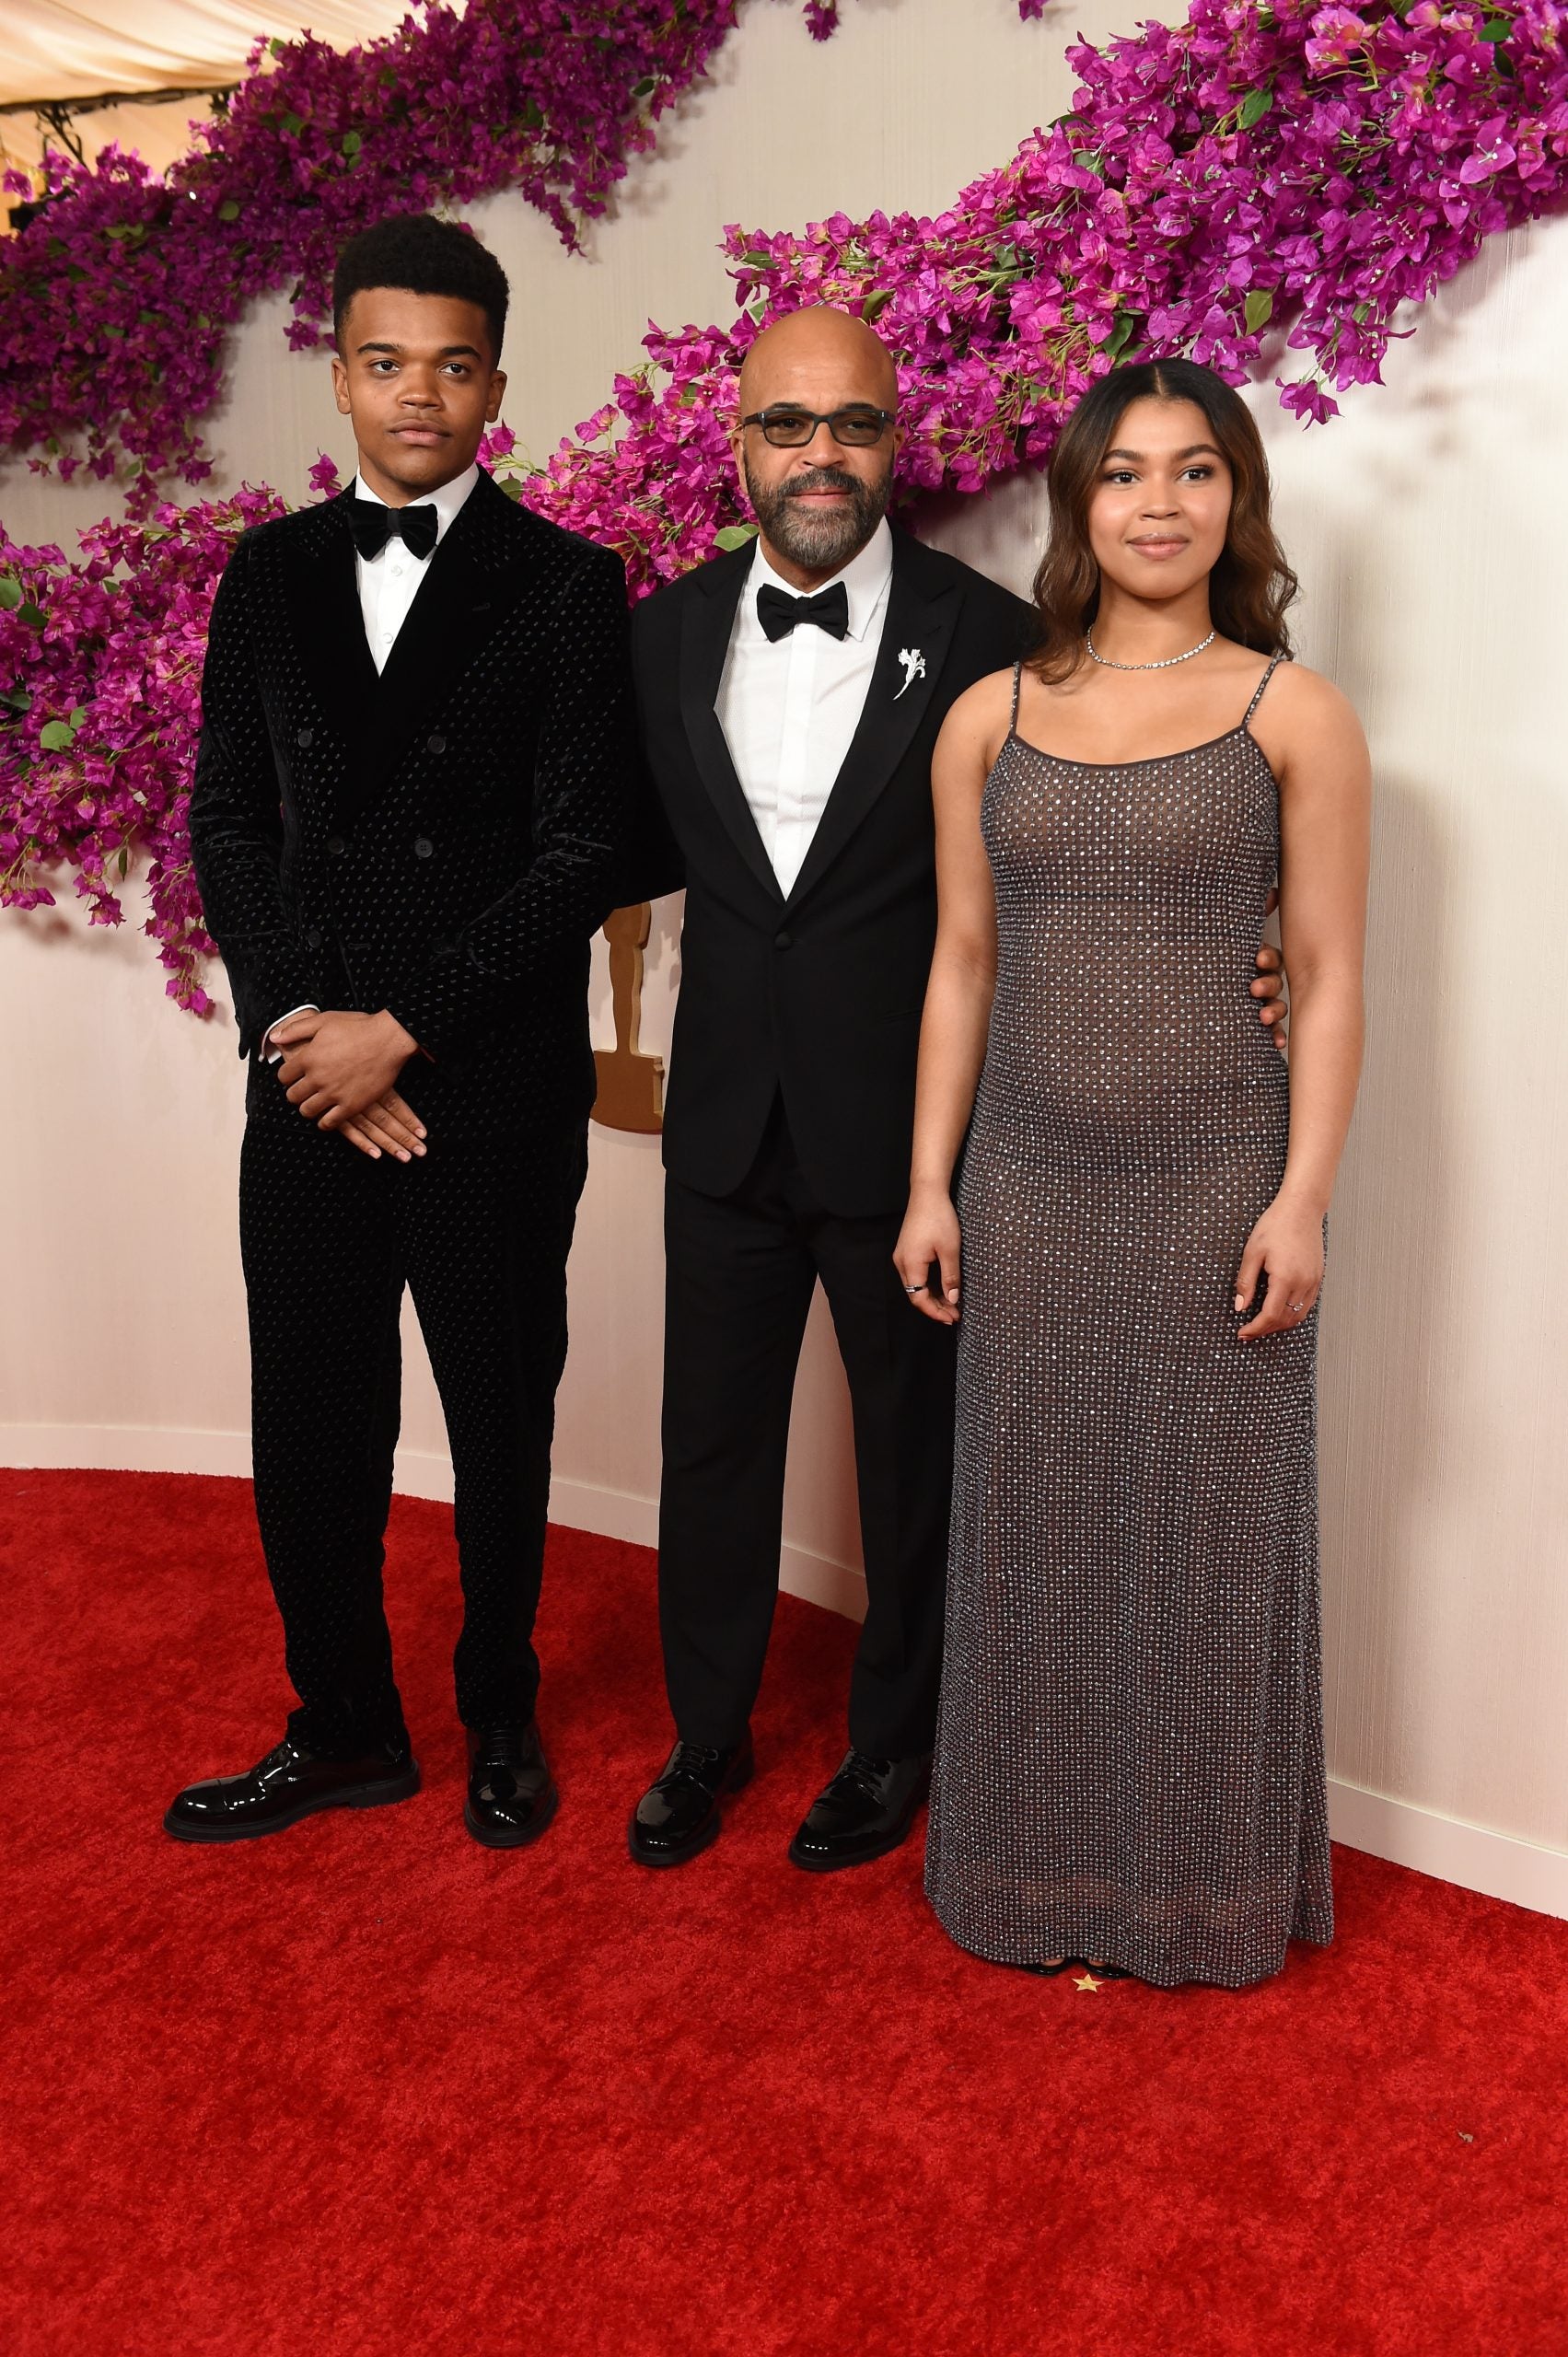 Black Men Brought Their Daughters To The Oscars And It’s Giving Us All The Feels